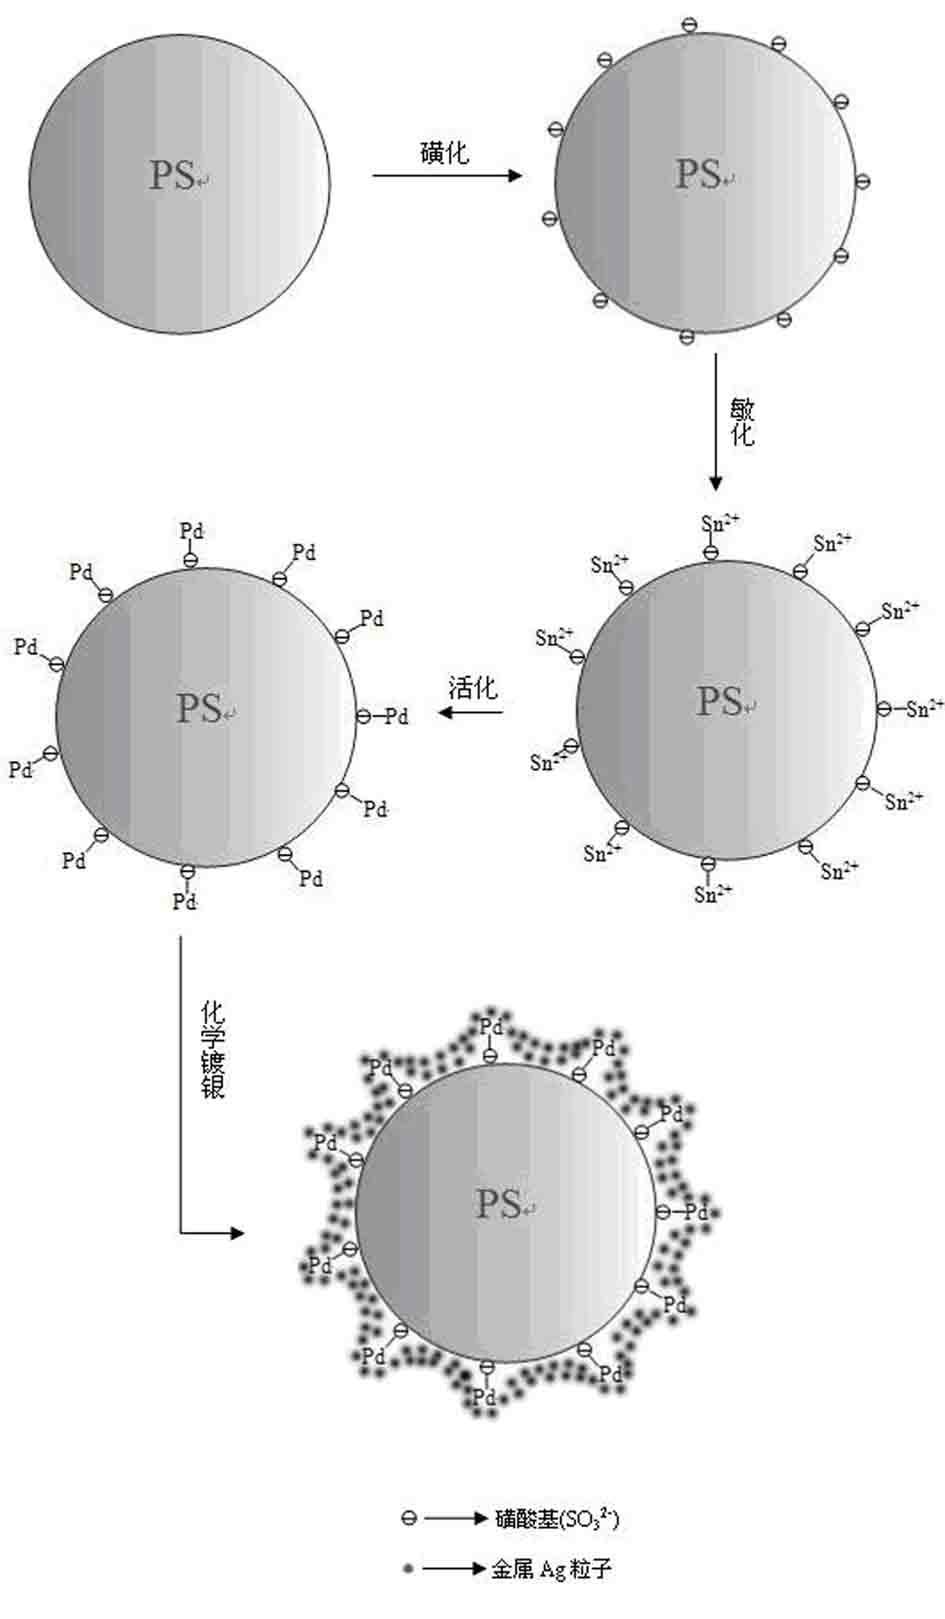 Chemical silvering method for PS (polystyrene) microspheres